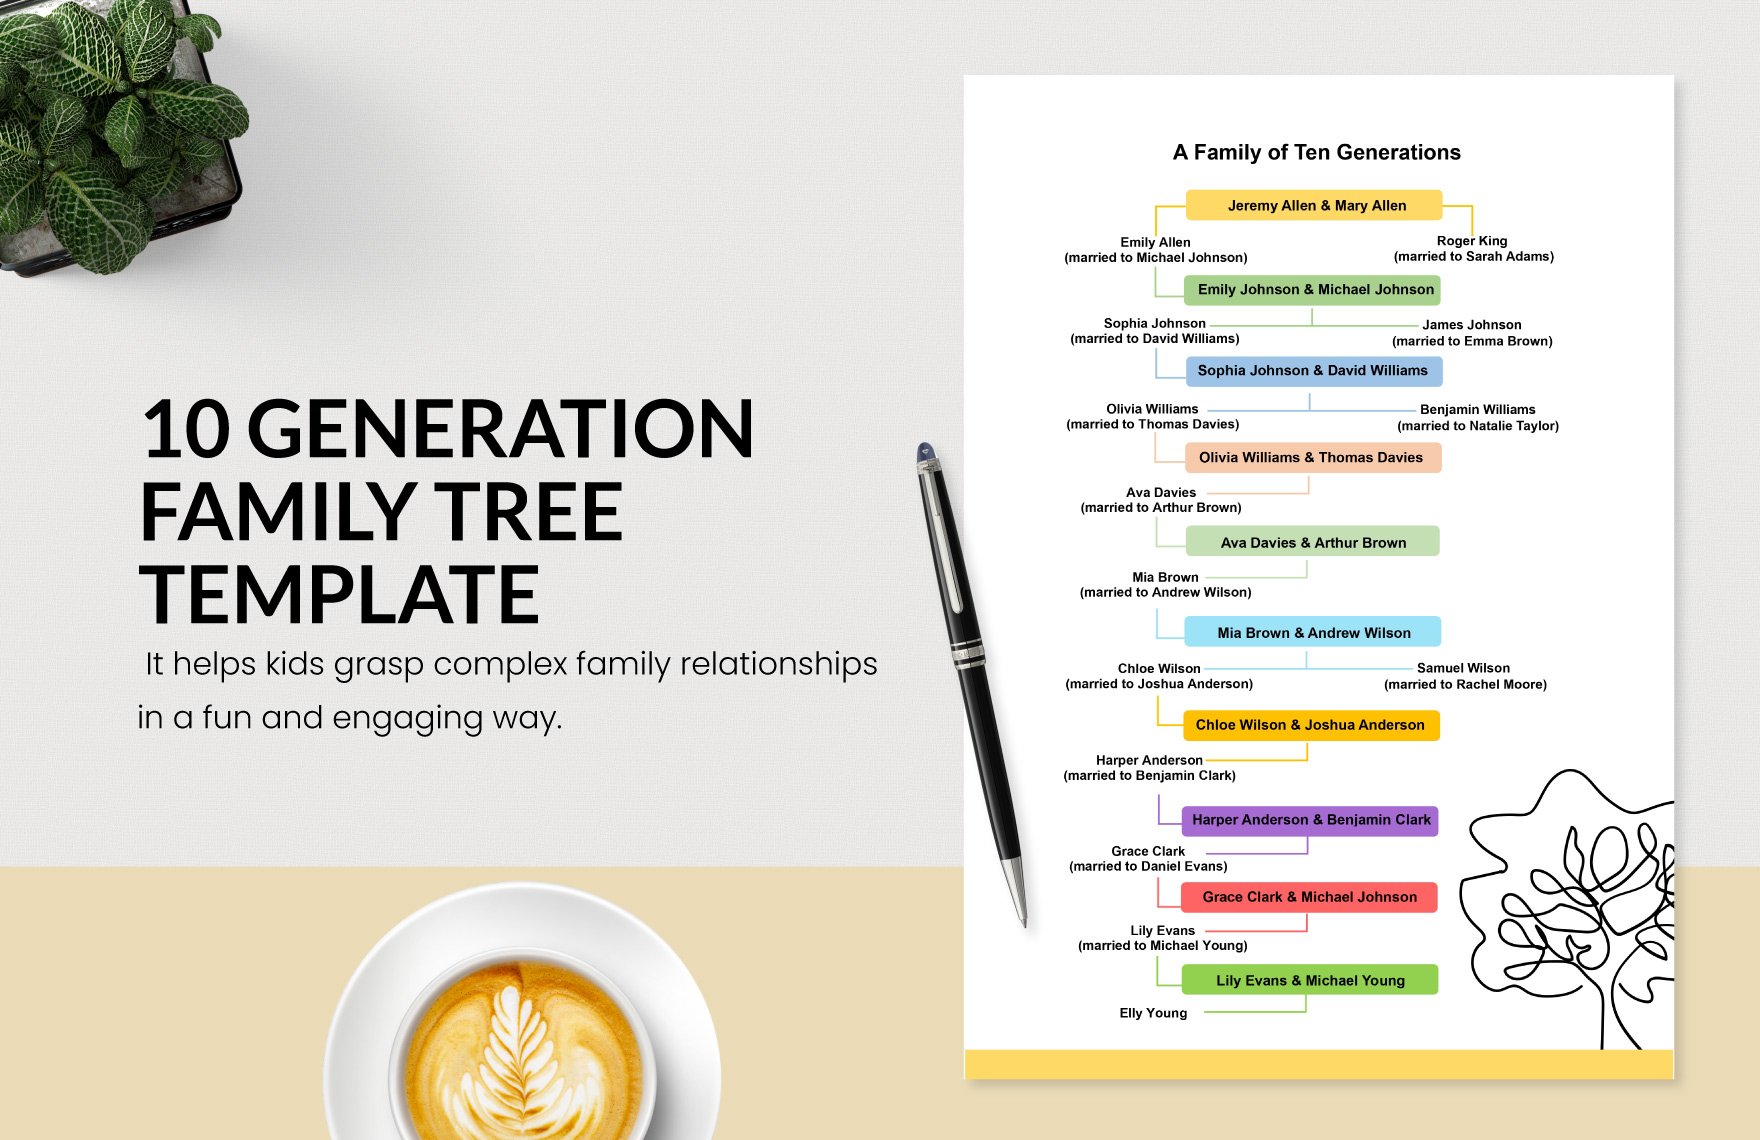 10 Generation Family Tree Template For Kid's